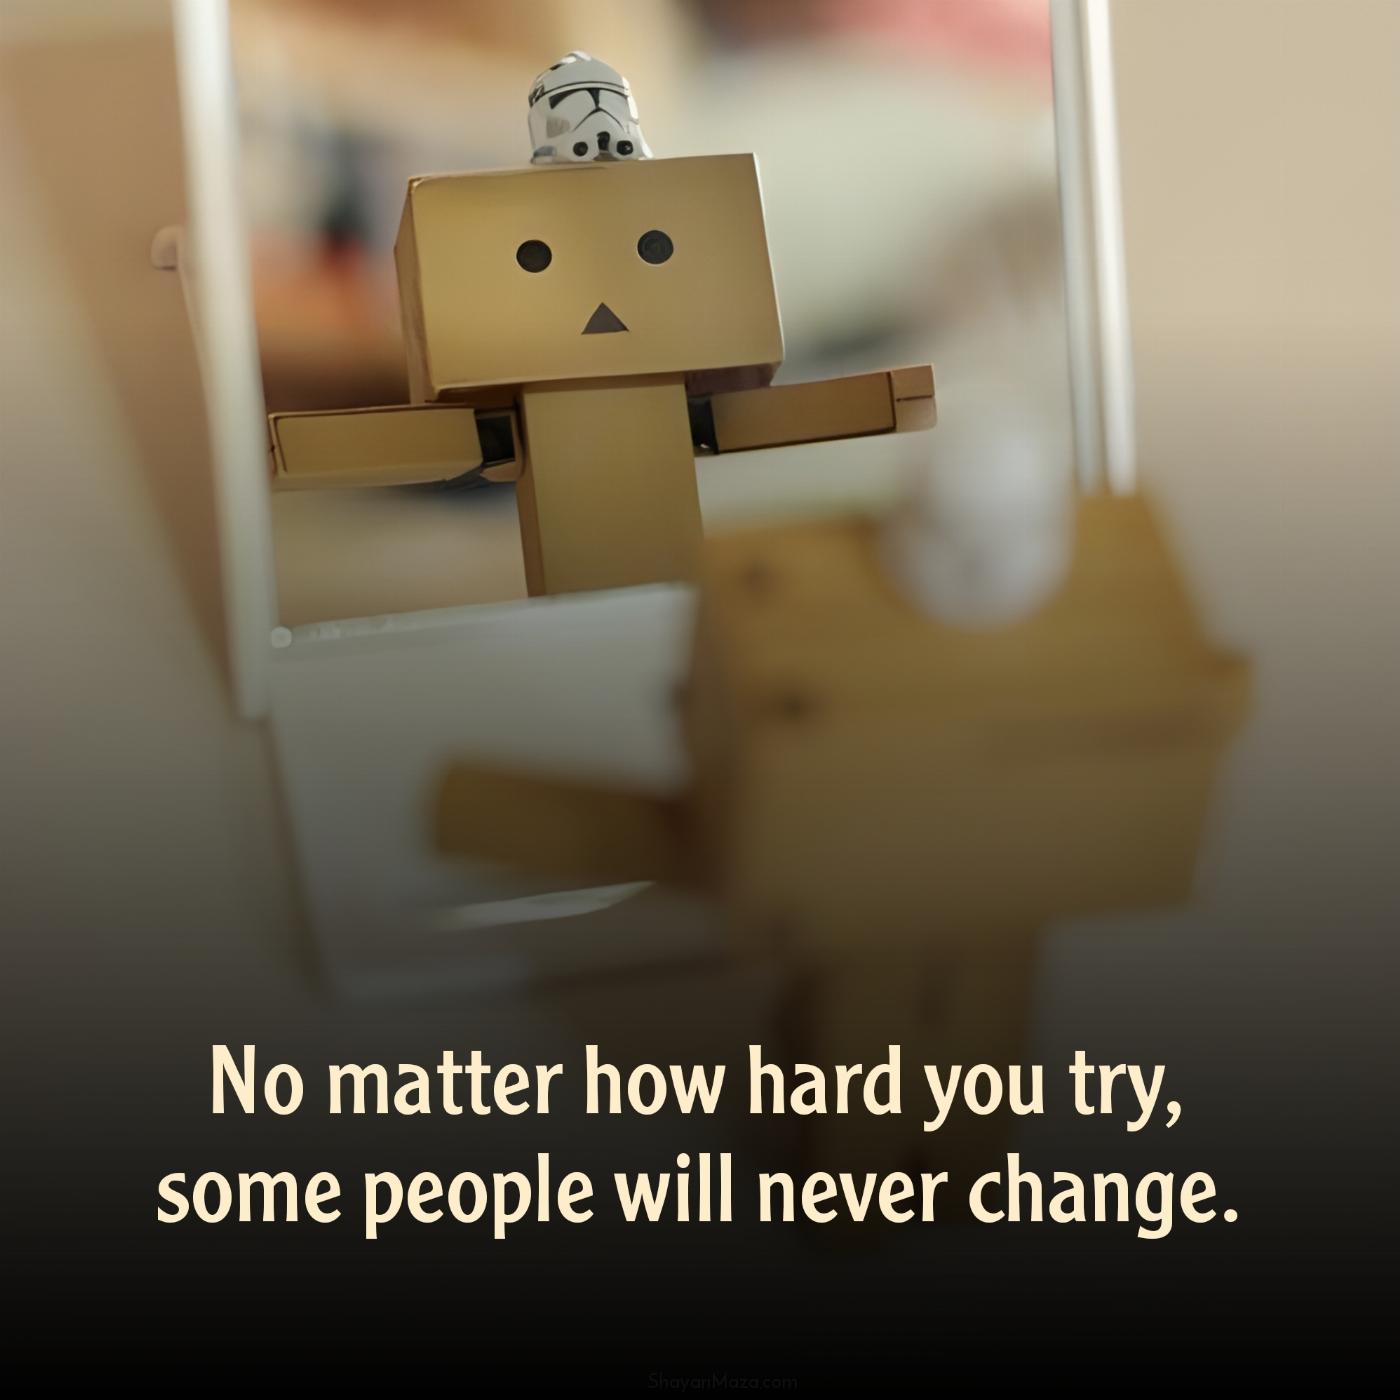 No matter how hard you try some people will never change